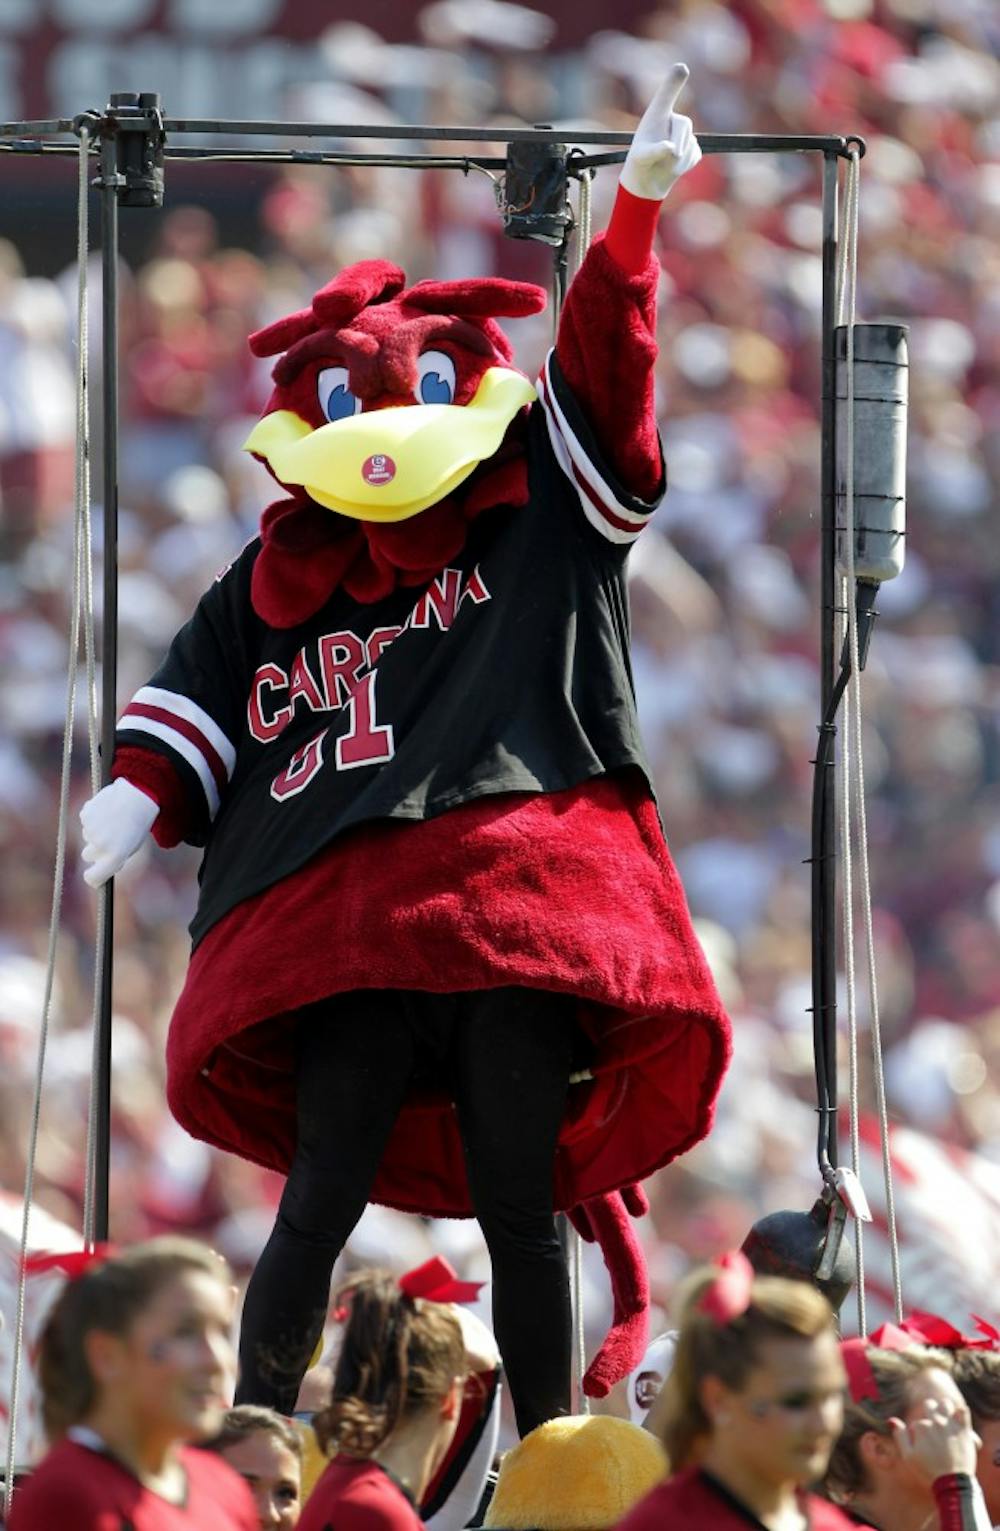 The University of South Carolina mascot, Cocky, gets the crowd pumped up before the Gamecocks take on Missouri at William-Brice Stadium in Columbia, South Carolina, Saturday, September 22, 2012. South Carolina defeated Missouri, 31-10. (C. Aluka Berry/The State/MCT)